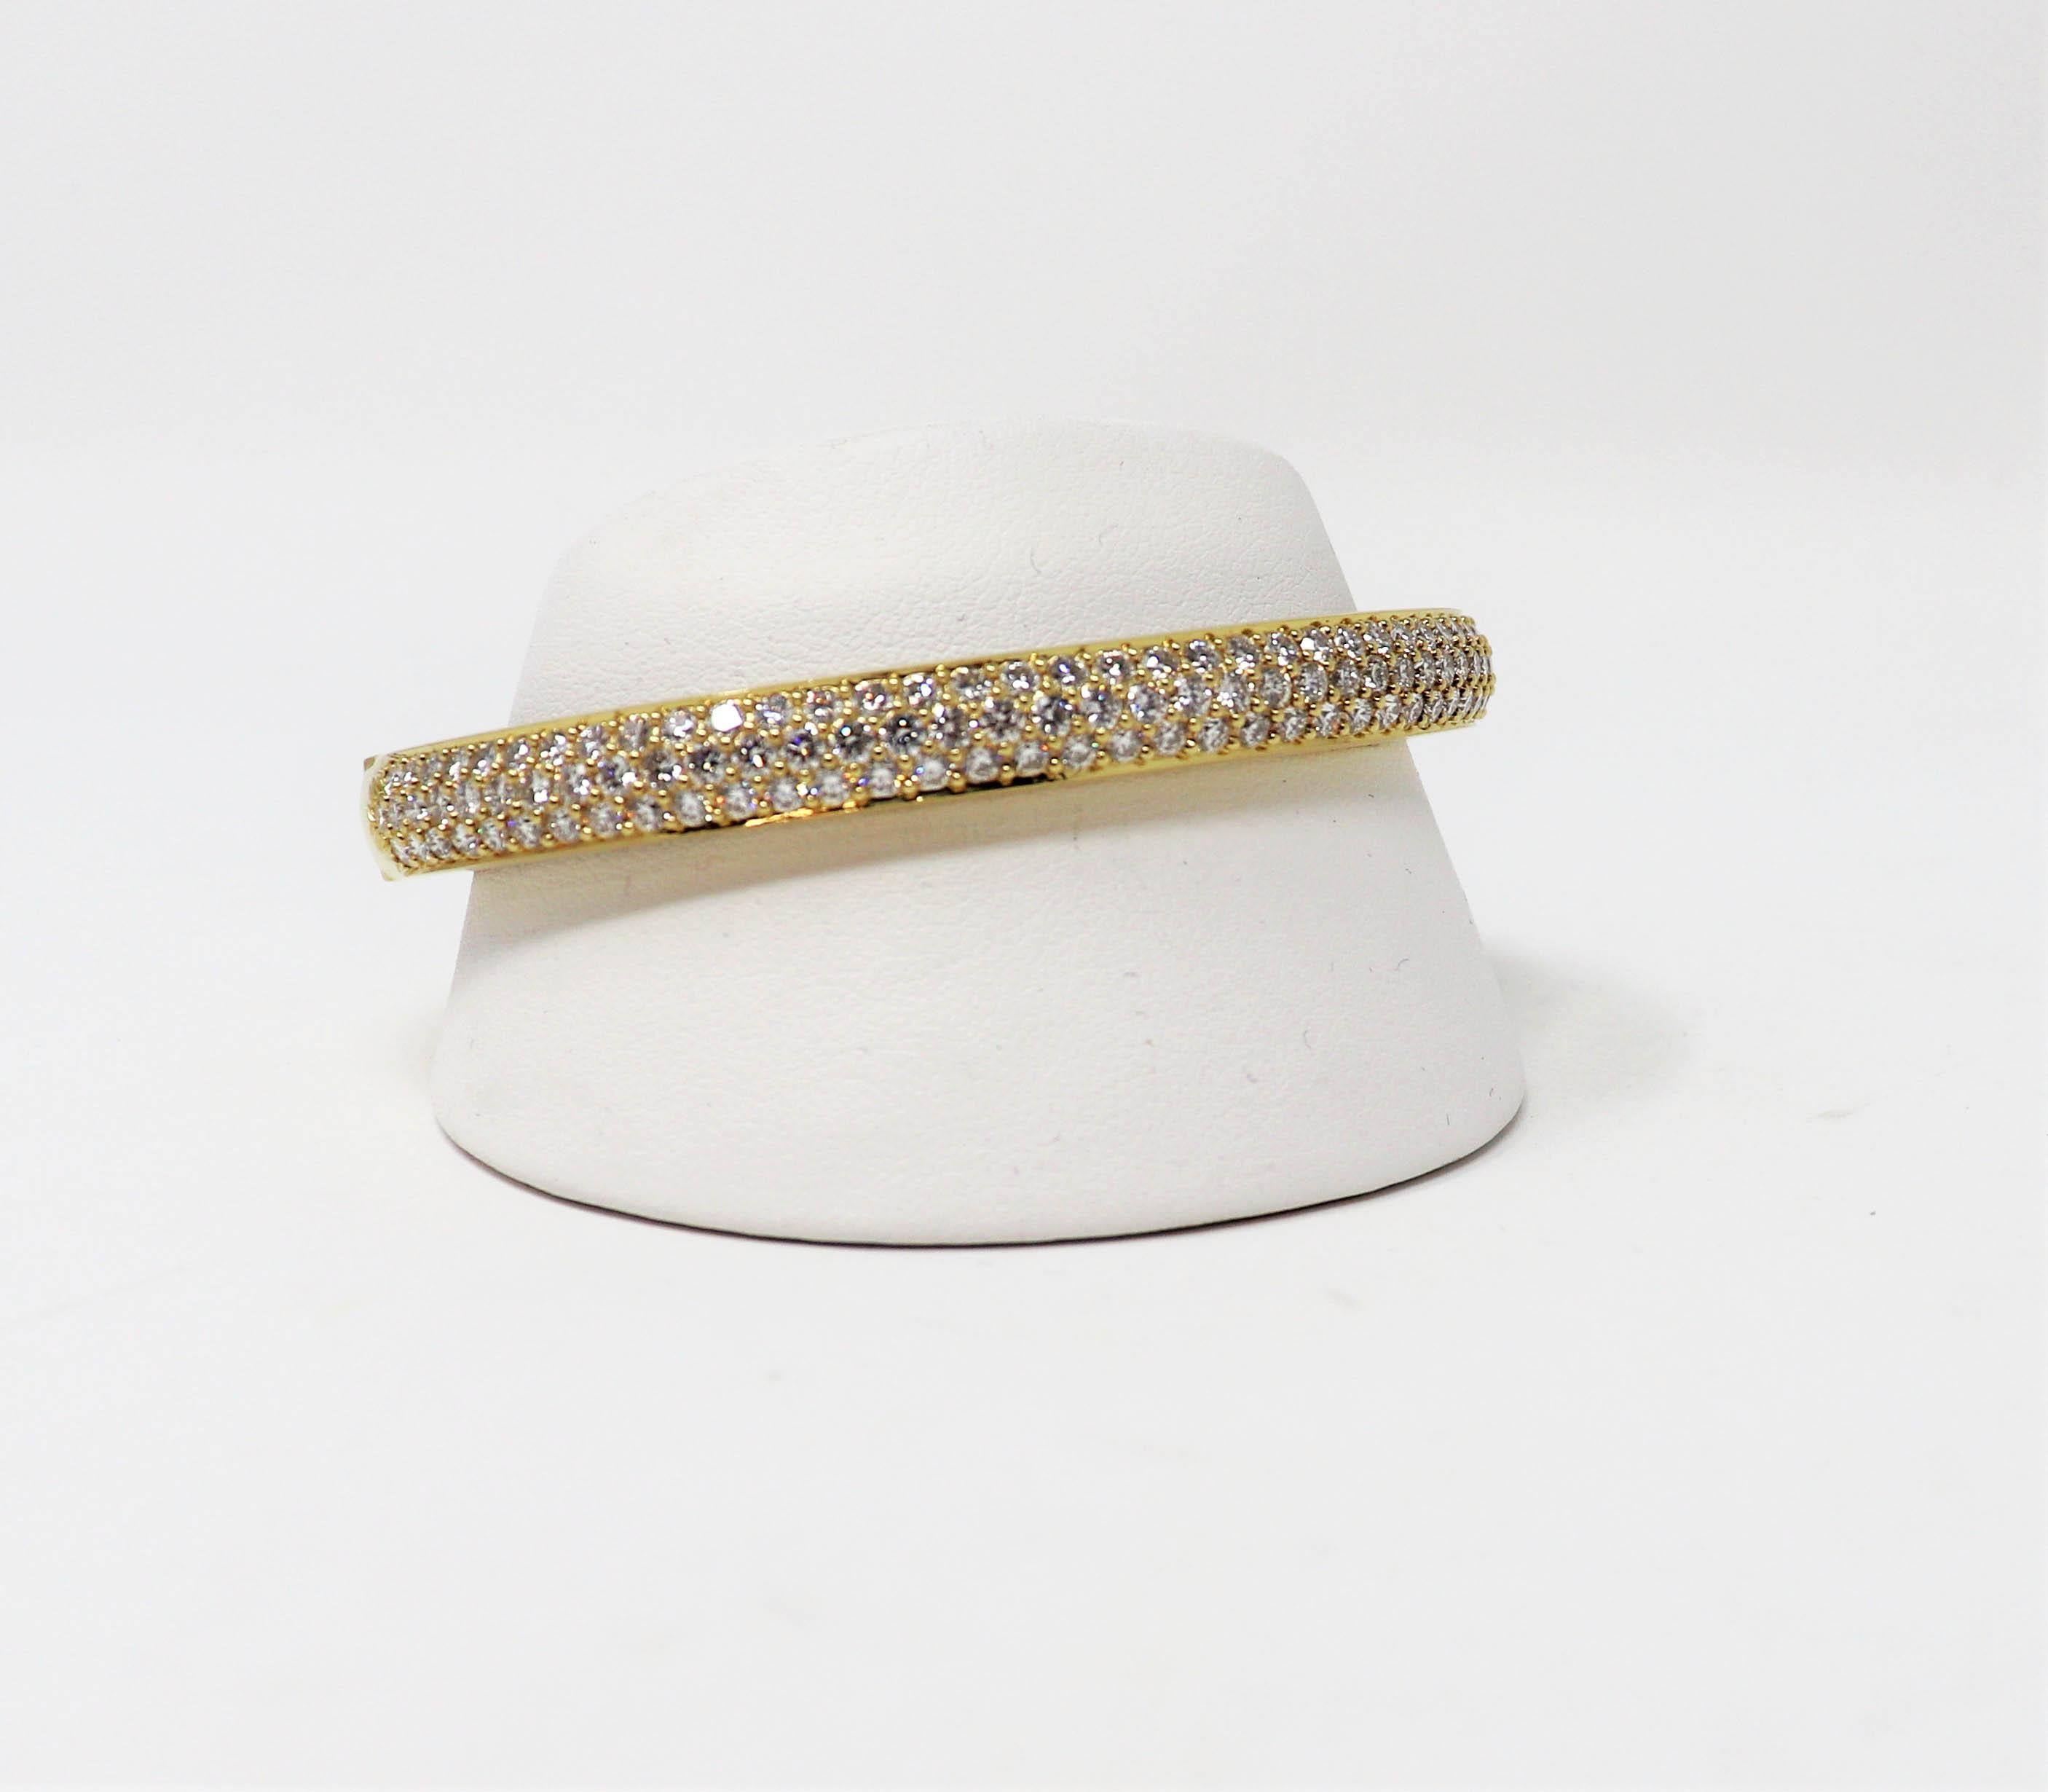 Absolutely lovely pave diamond bangle bracelet. The sleek, modern design bursts with sparkle from all angles from the stunning natural icy white diamonds. This incredible piece can be stacked with other bracelets or worn simply on its own, offering